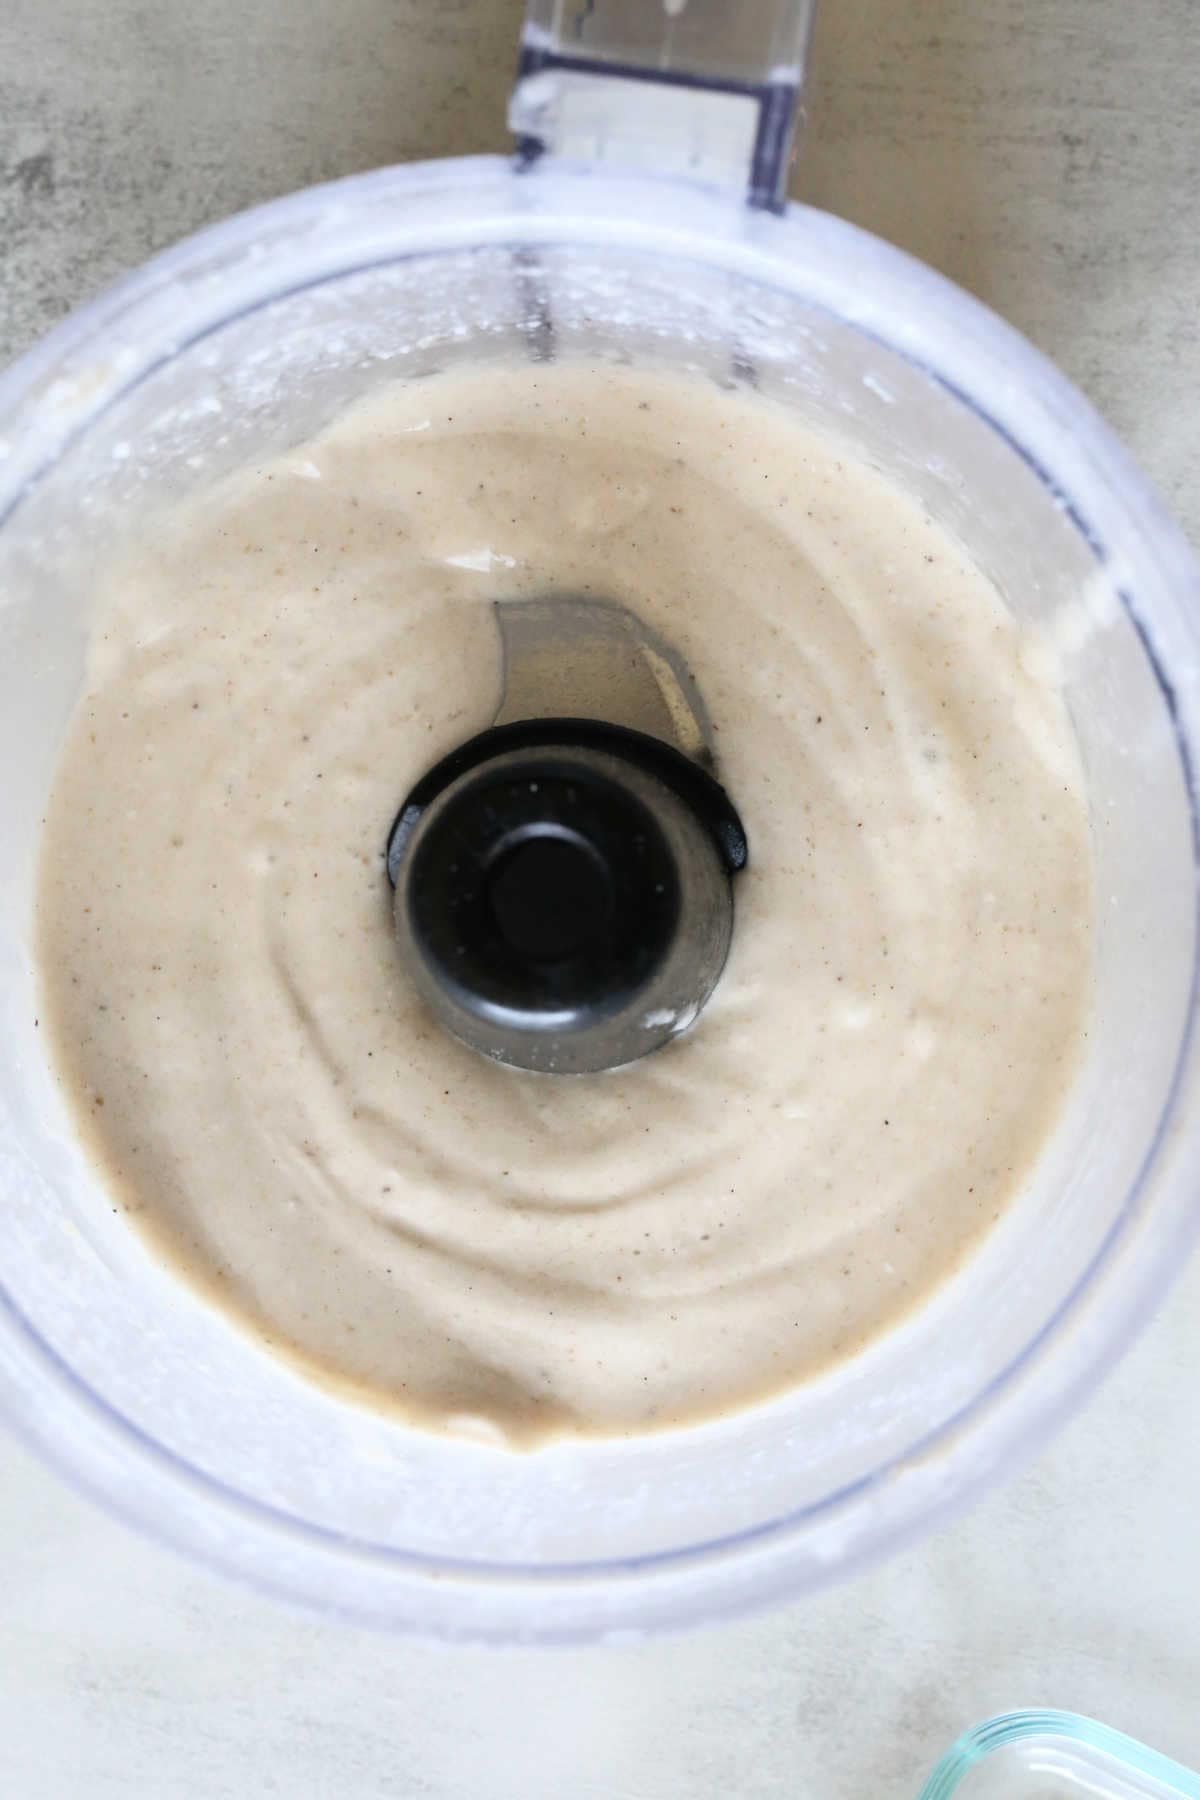 Pureed Frozen Bananas and Coconut Milk in a Food Processor for Ice Cream